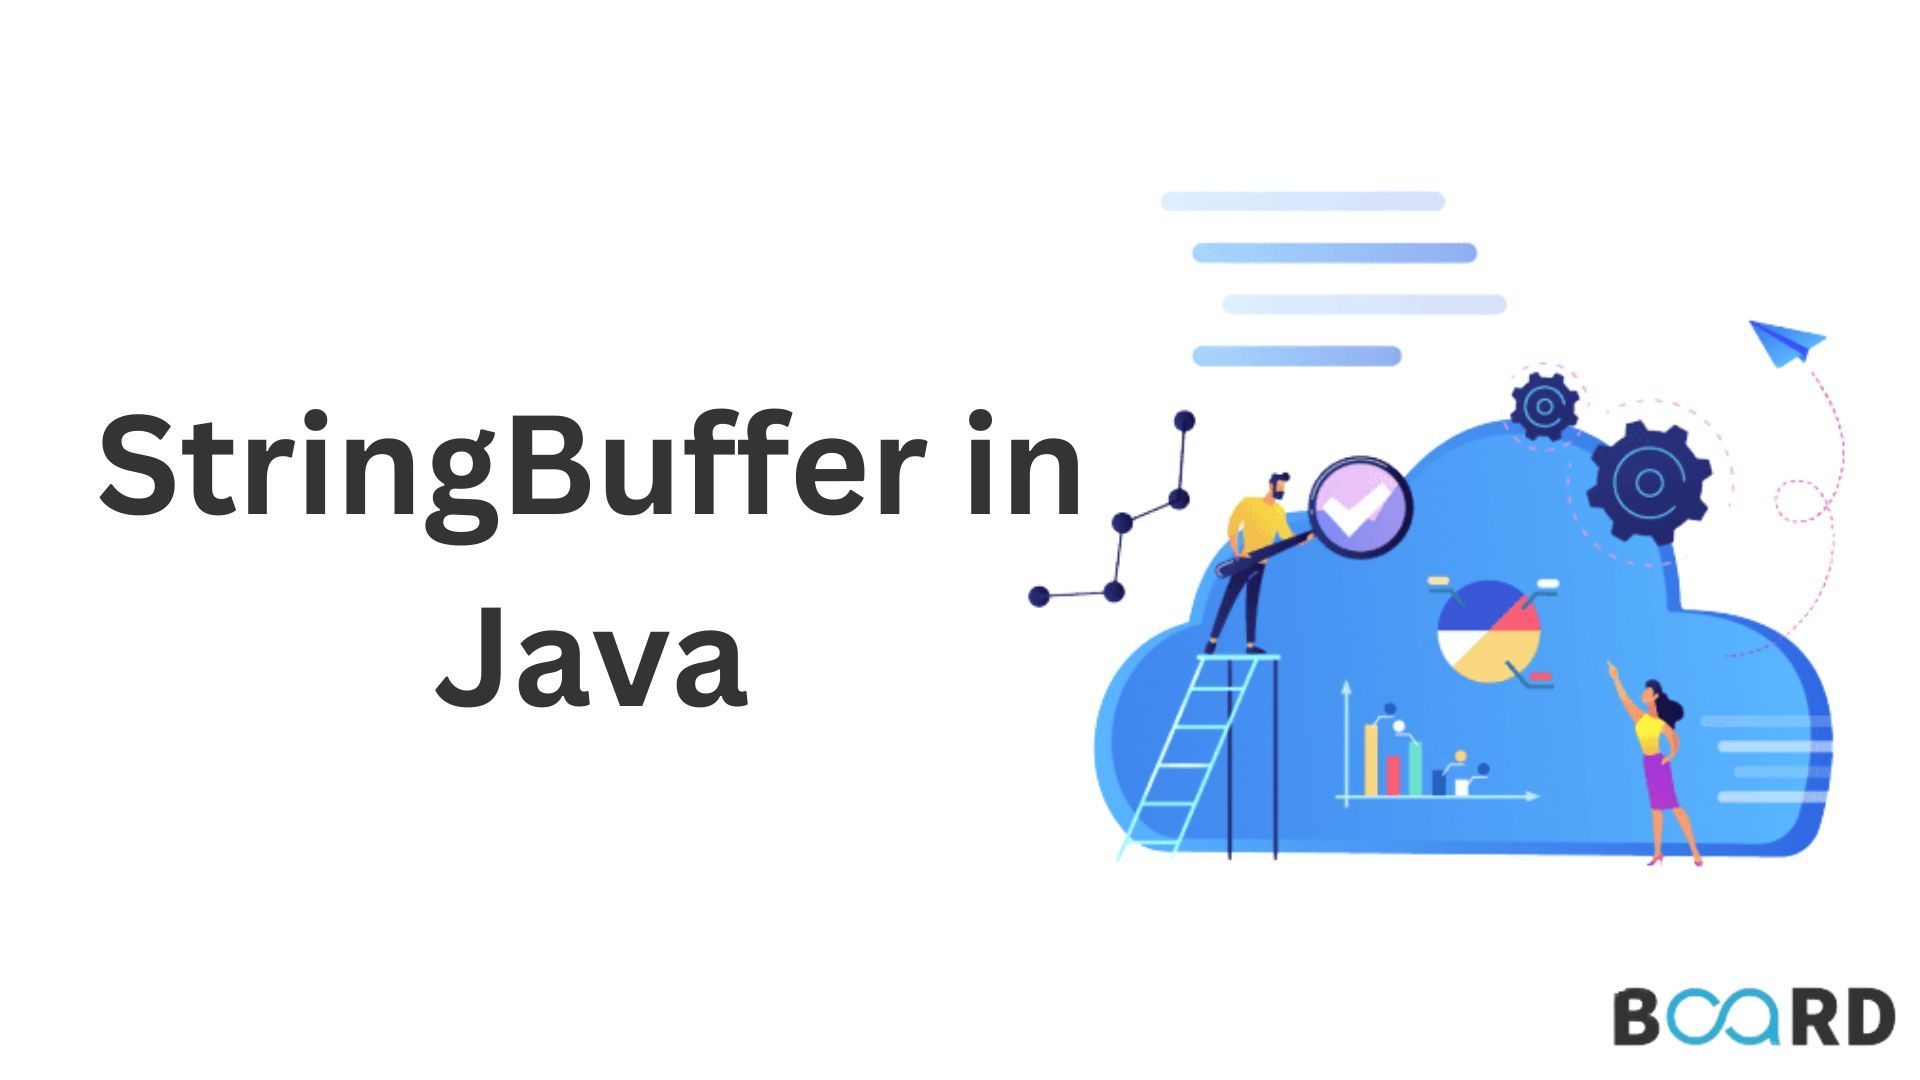 Introduction to StringBuffer in Java